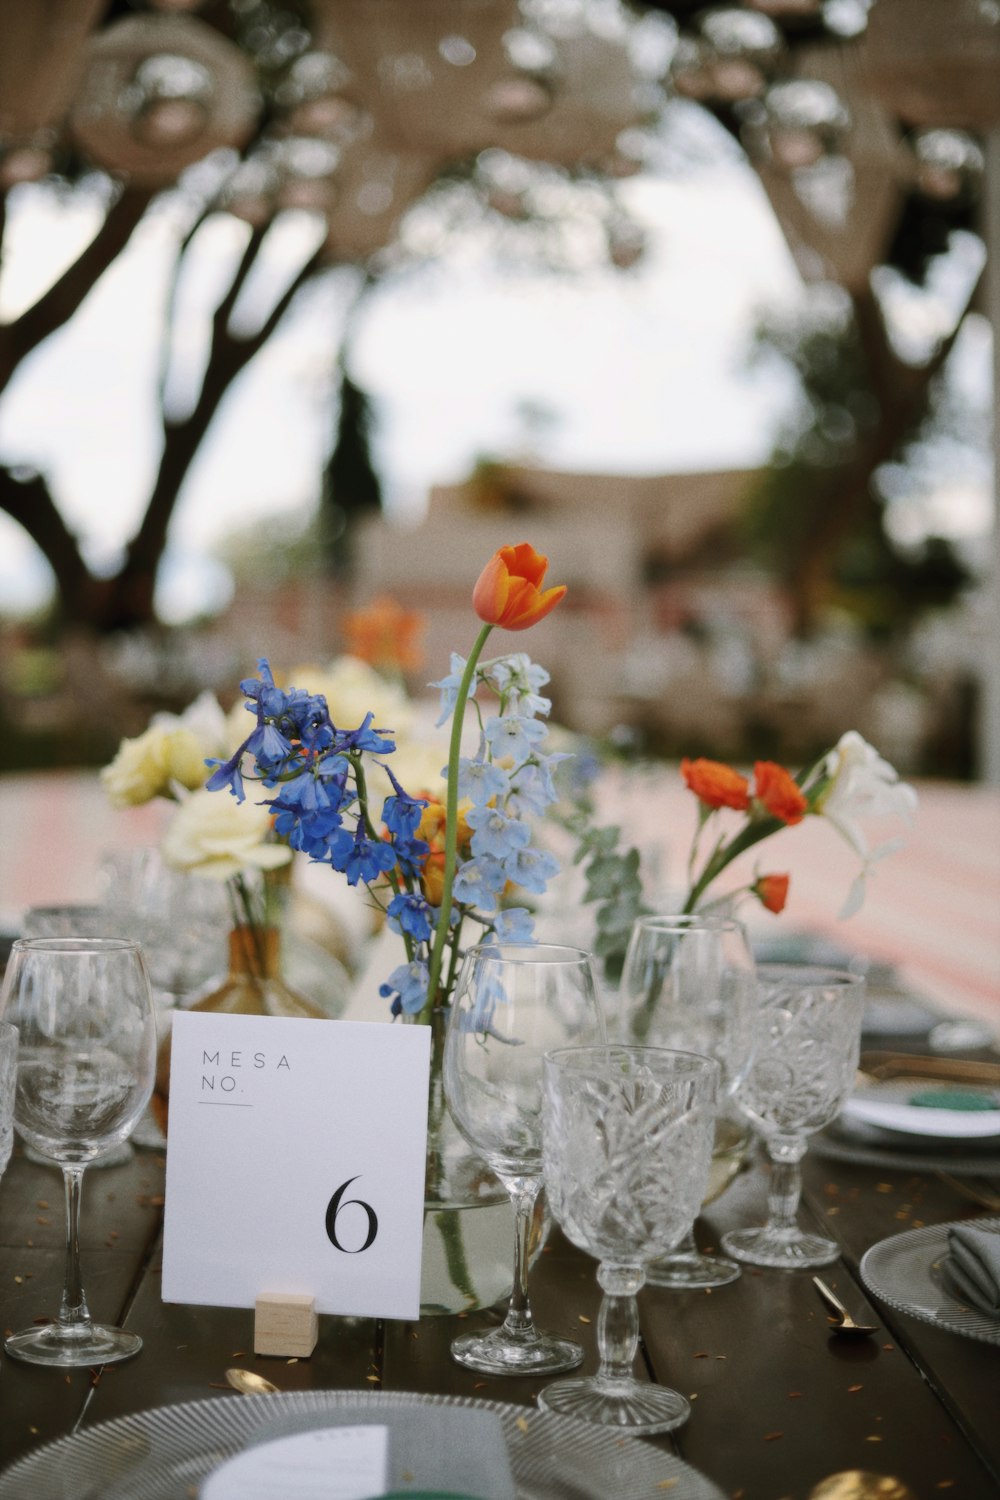 a table is set with glasses, plates, and flowers